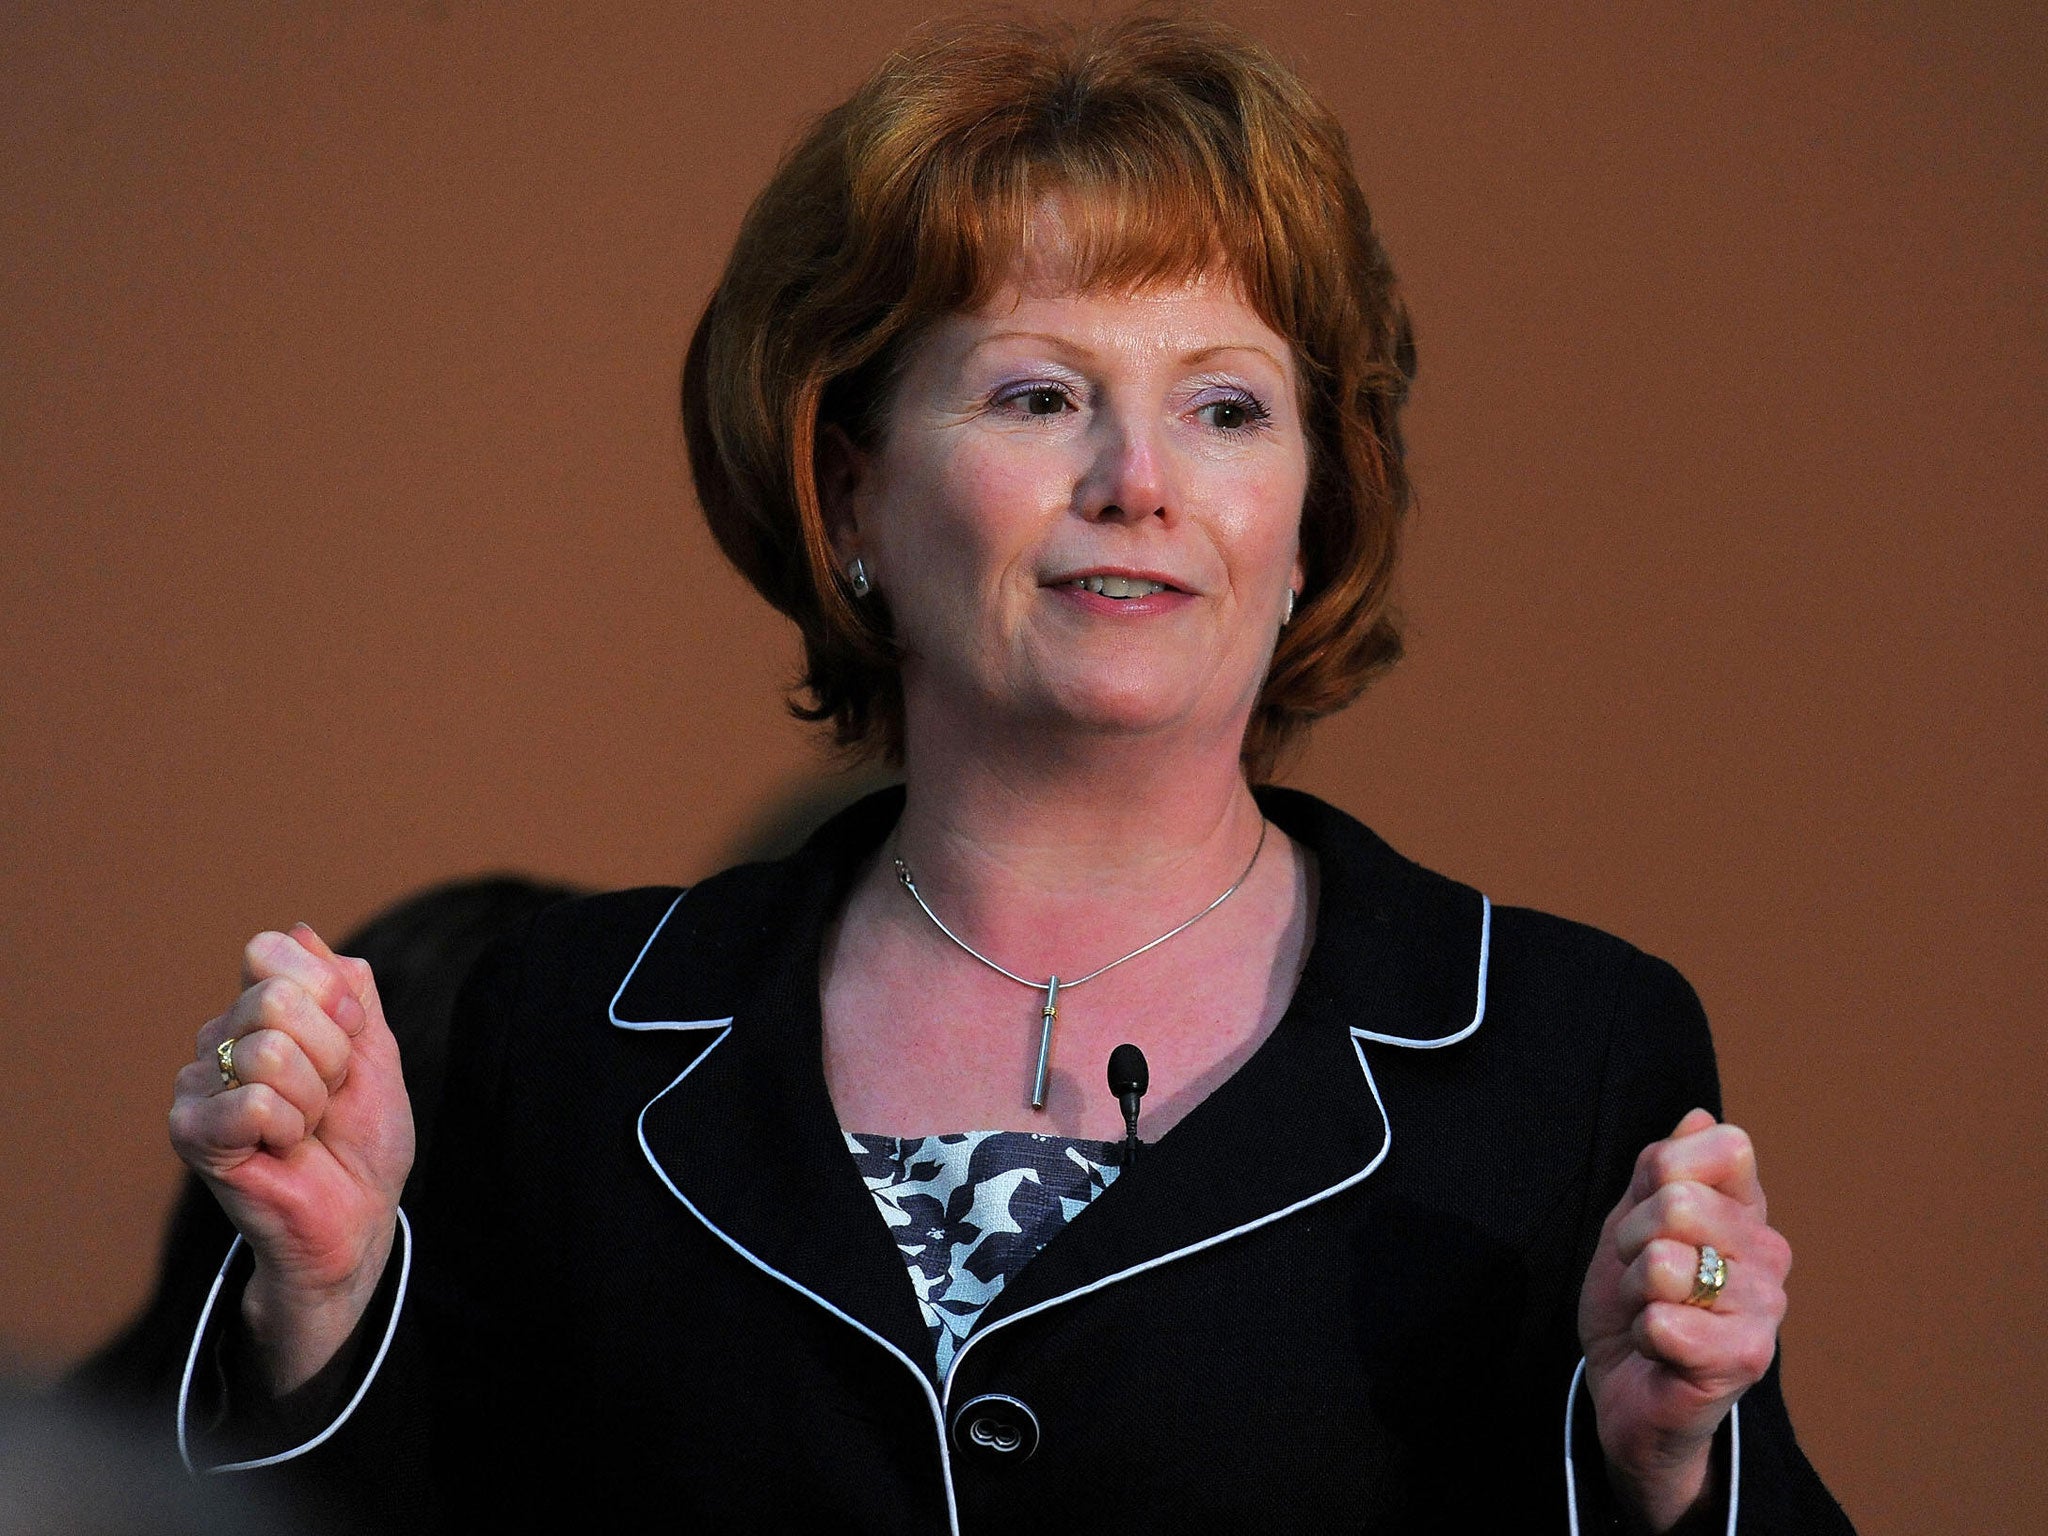 Hazel Blears: important to steer young away from extreme views